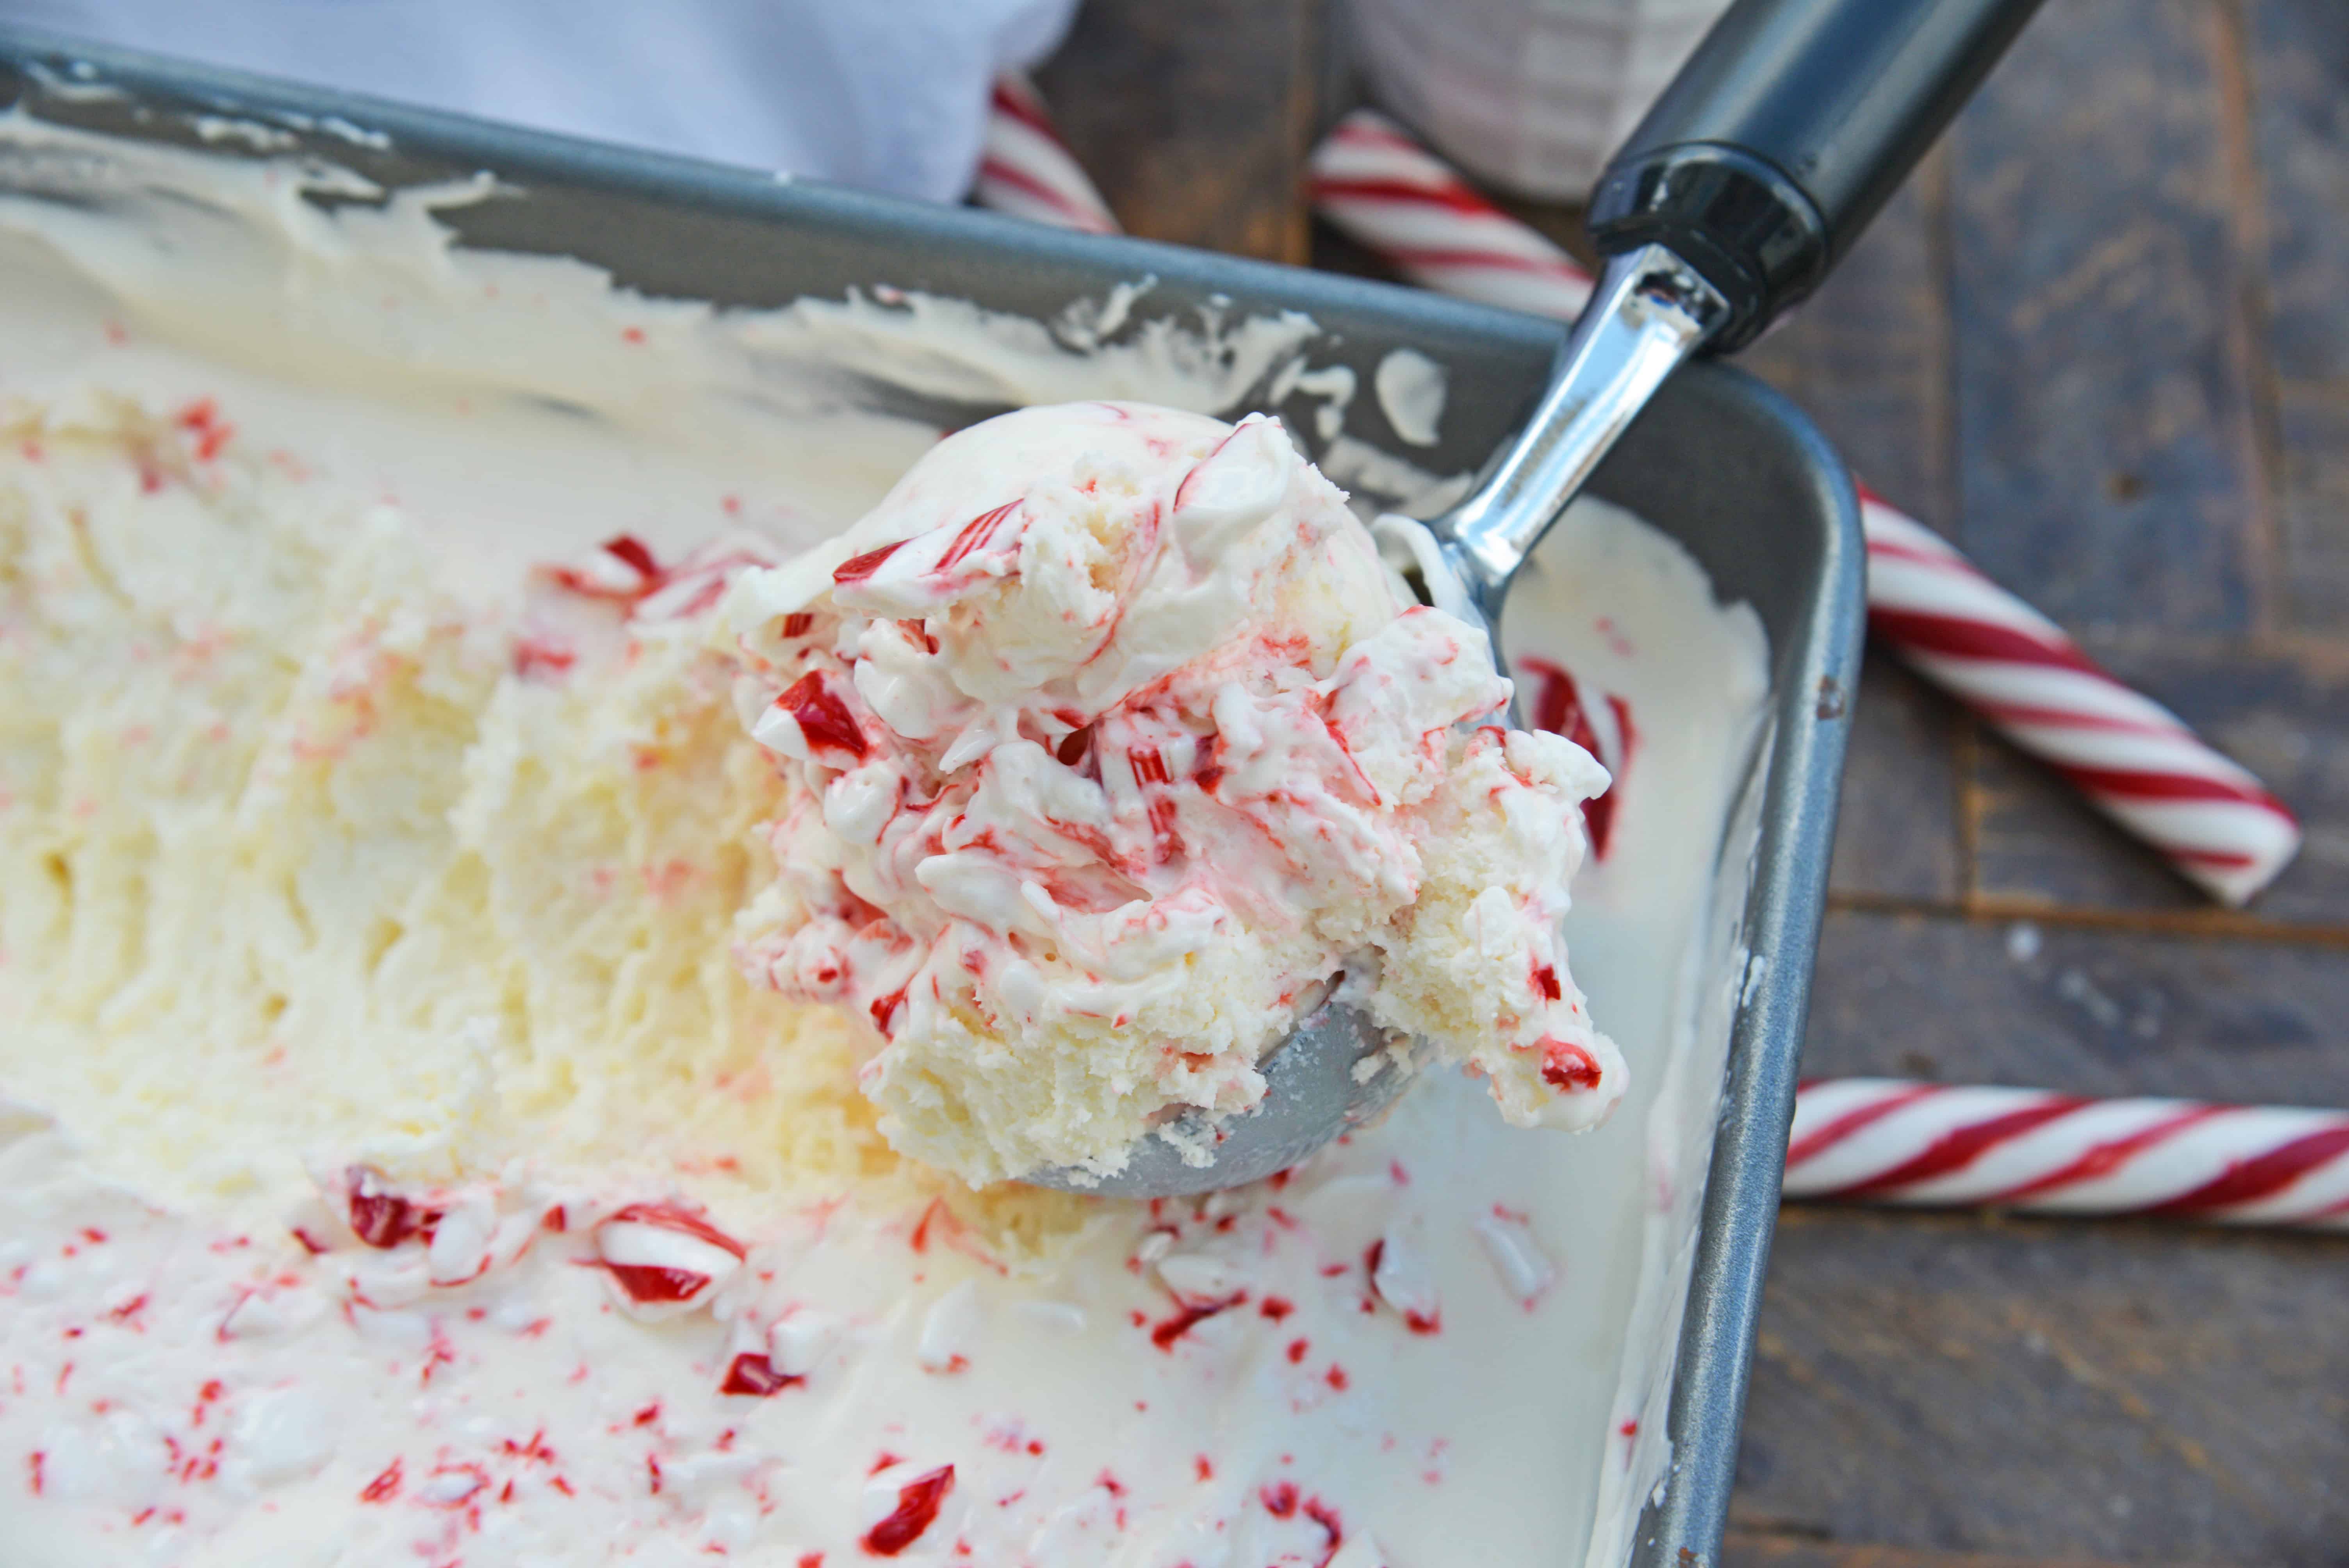 No-Churn Peppermint Ice Cream is an easy homemade ice cream recipe made with just 5 ingredients. No ice cream maker required! Perfect for the holidays. #candycaneicecream #nochurnicecream #homemadeicecreamrecipes www.savoryexperiments.com